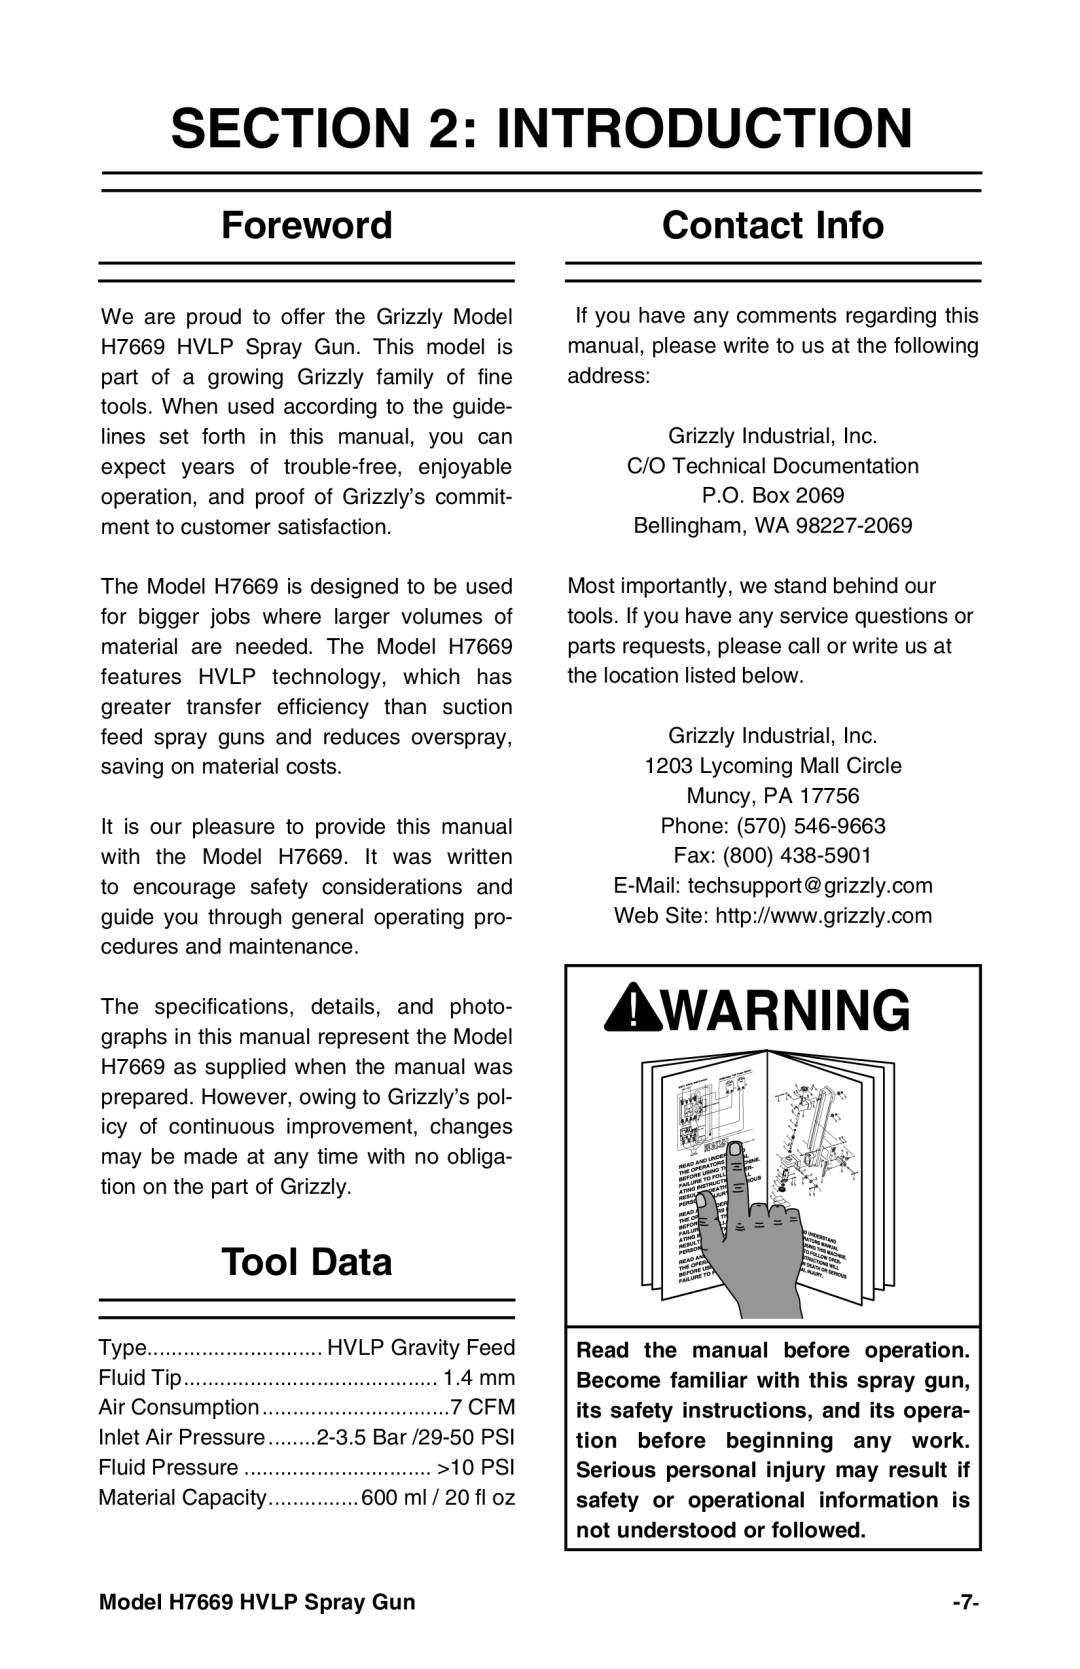 Grizzly H7669 instruction manual Introduction, Foreword, Contact Info, Tool Data 